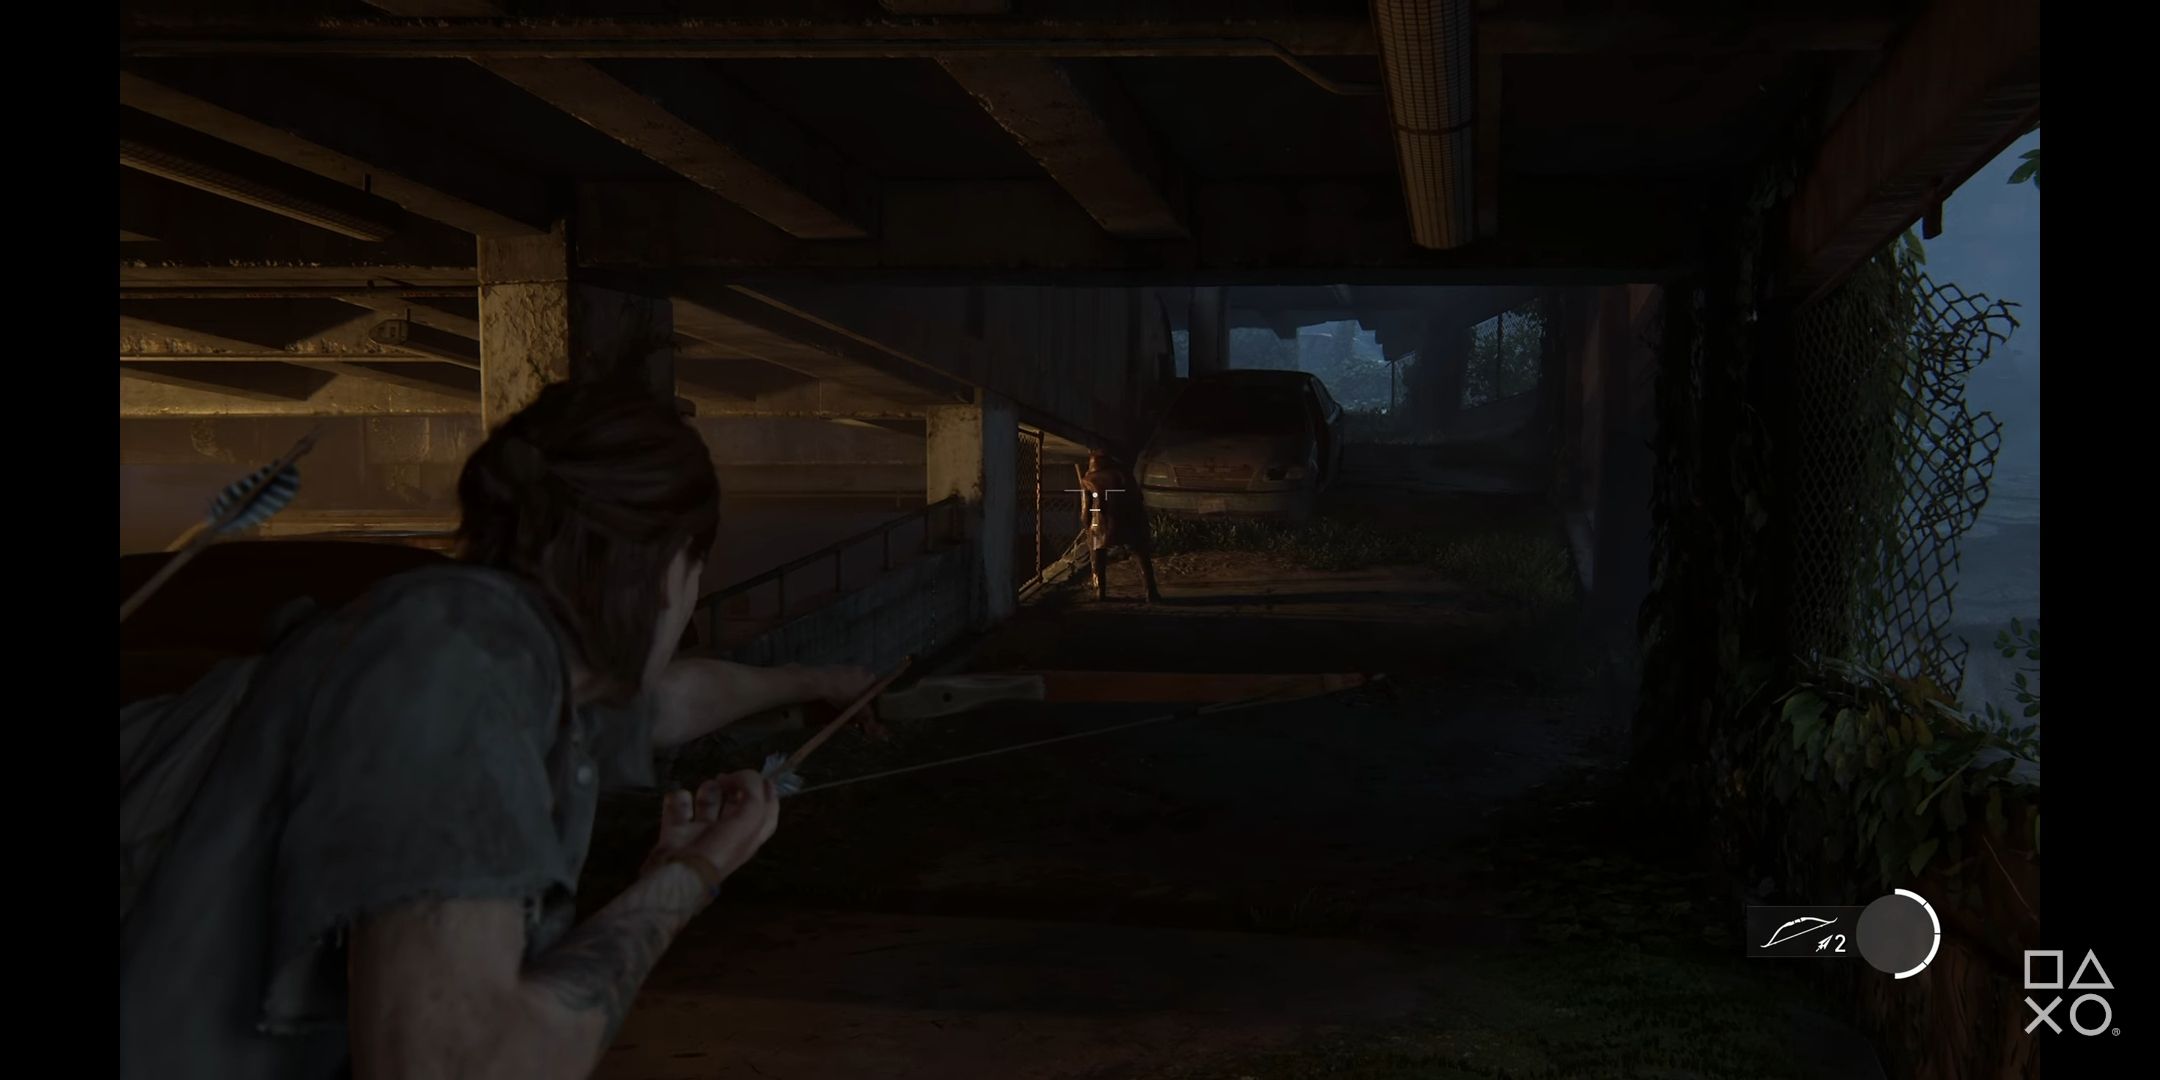 Ellie firing bow with new reticle in The Last of Us 2 gameplay trailer/demo